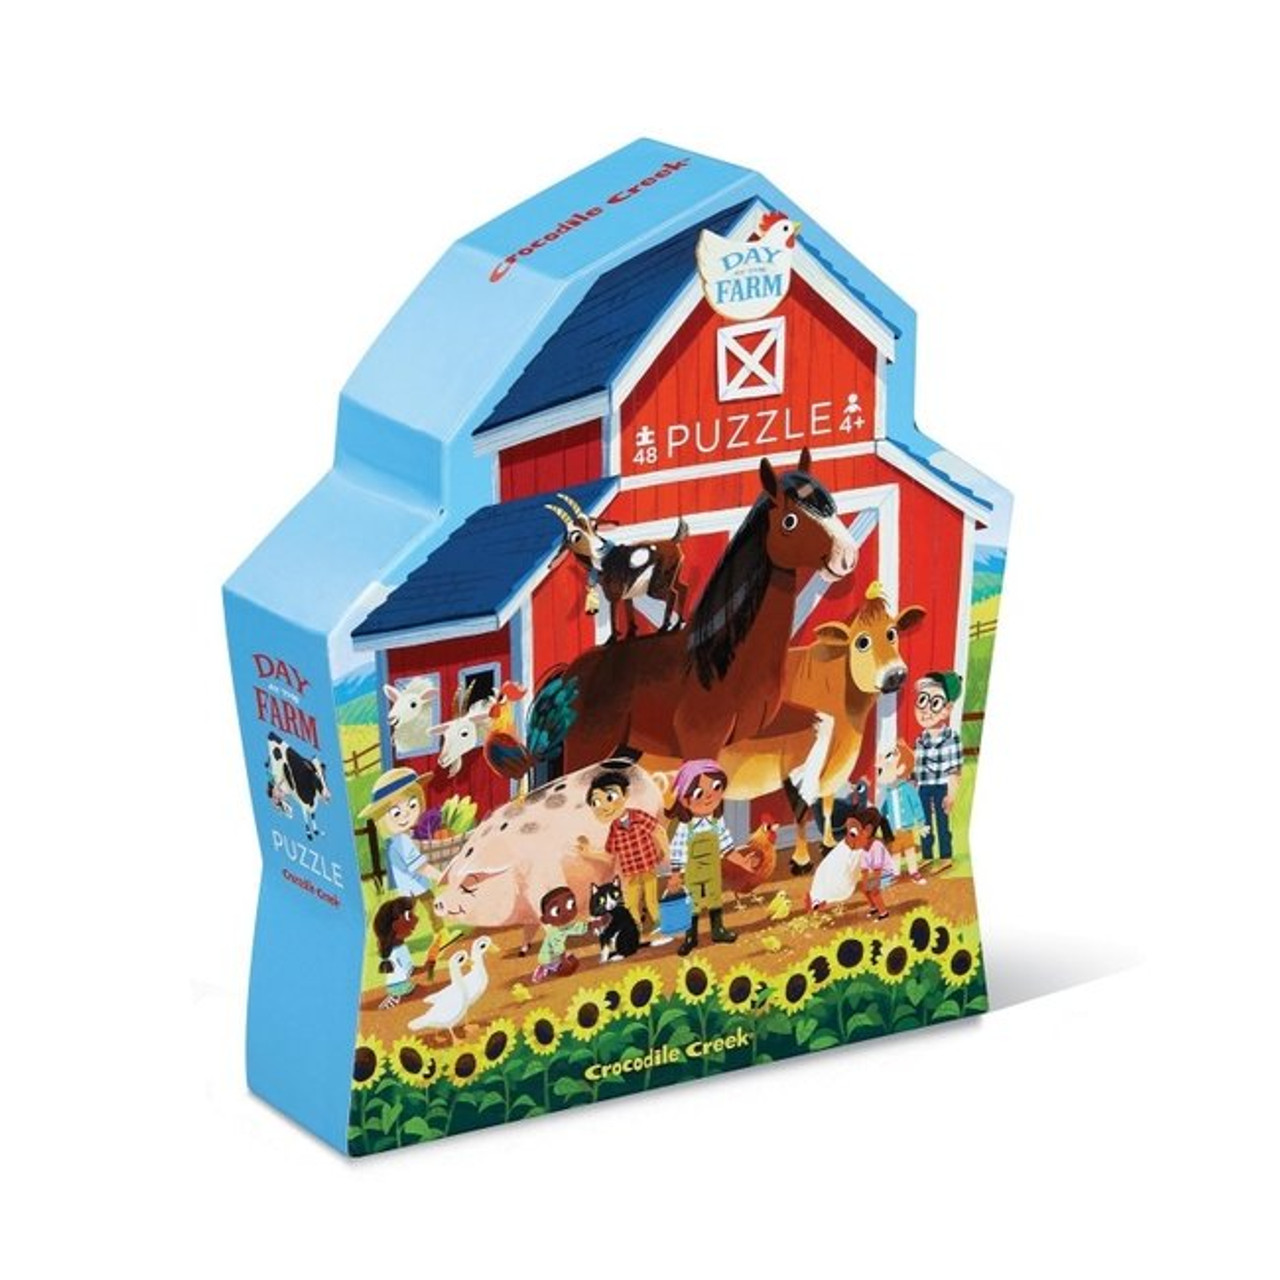 DAY AT THE FARM PUZZLE 48PCS